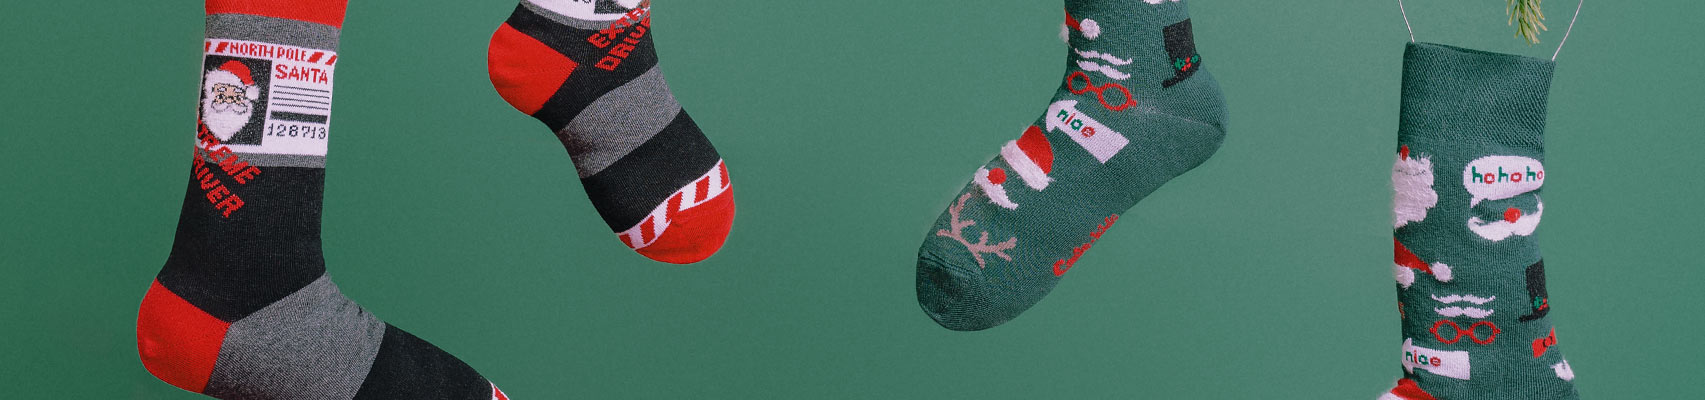 NEW YEAR SOCKS FROM CONTE, DIWARI AND CONTE-KIDS